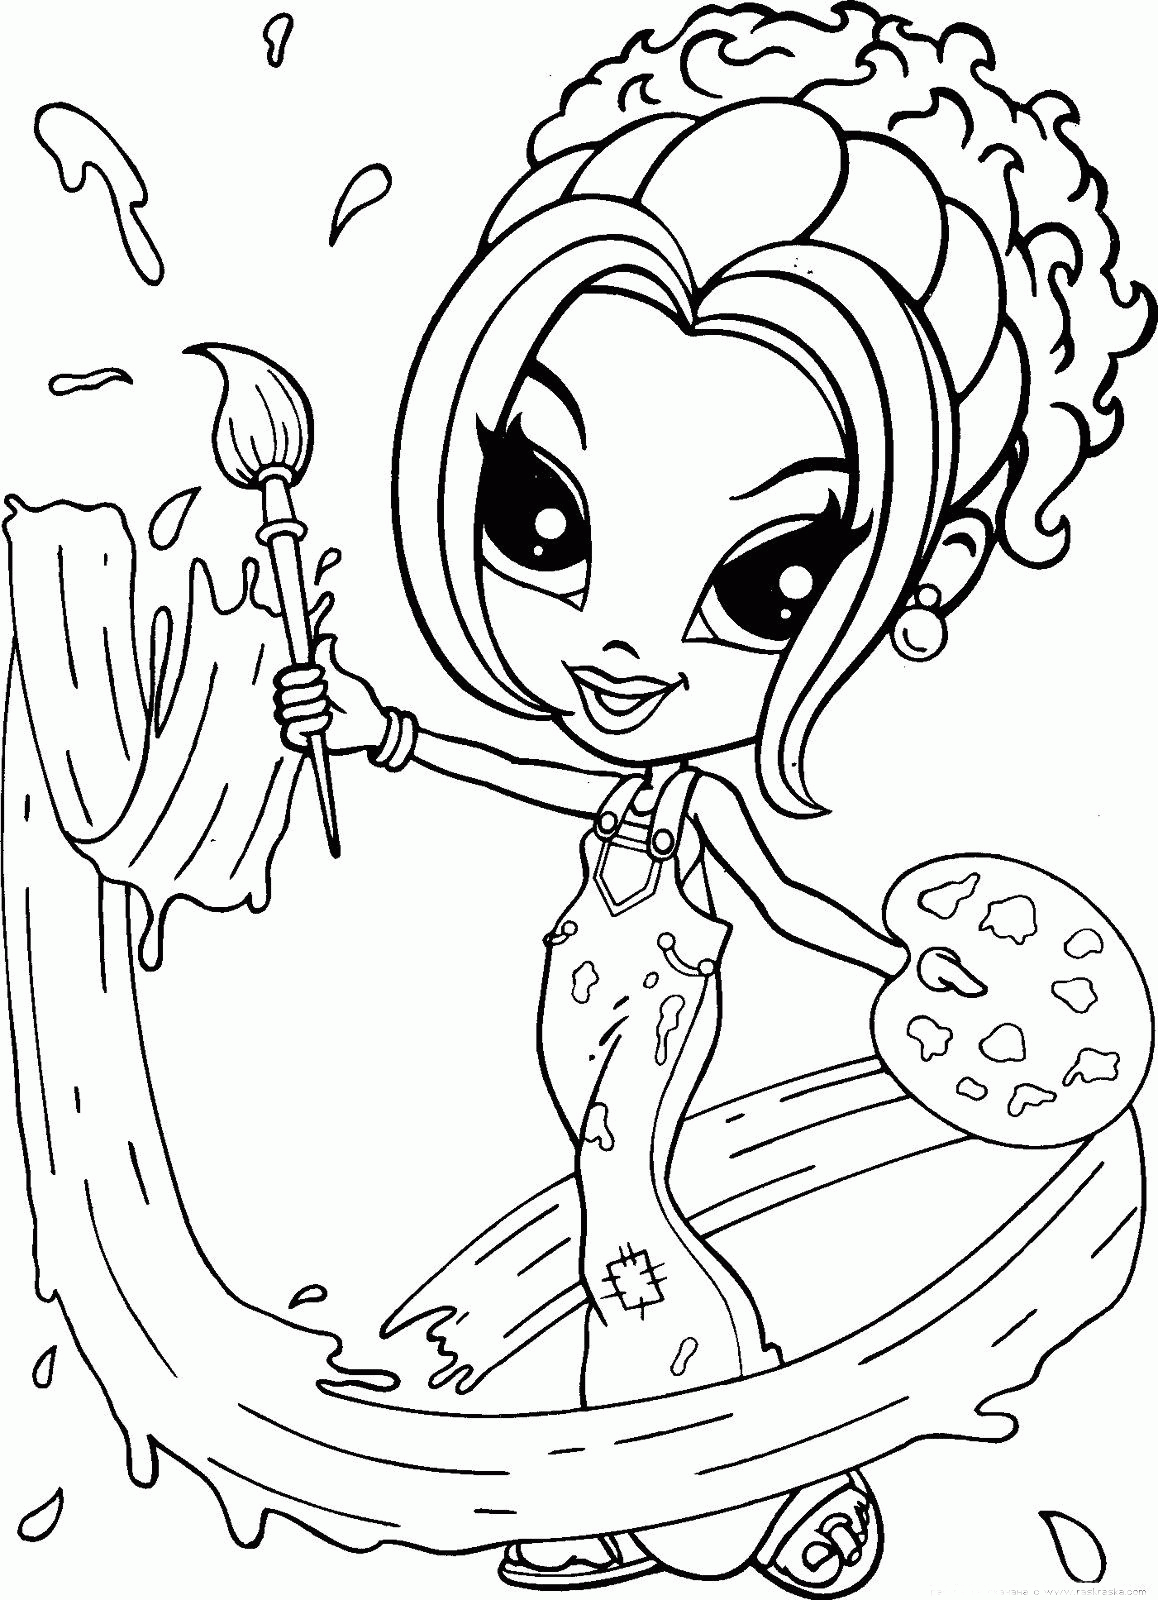 Lisa Frank Artist Coloring Page